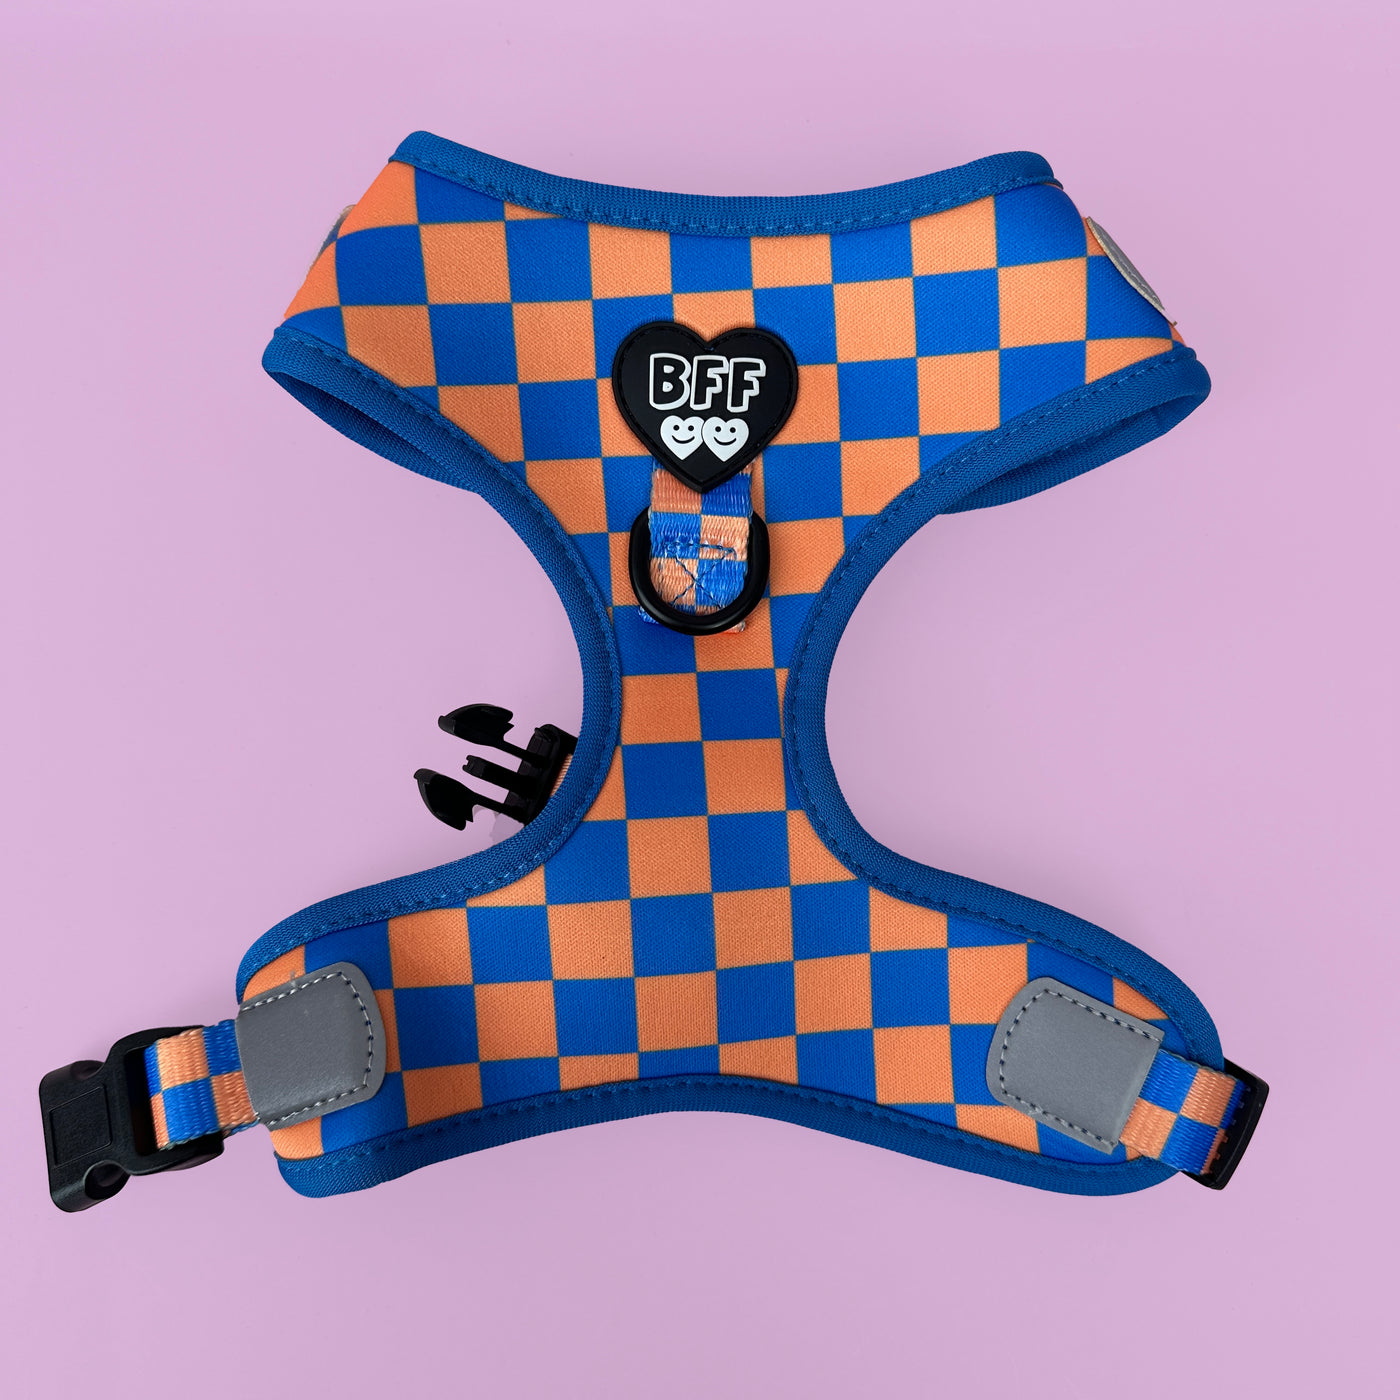 DOG HARNESS | Orange and Blue Checkers | Neck Adjustable Dog Harness-BFF-Dizzy Dog Collars